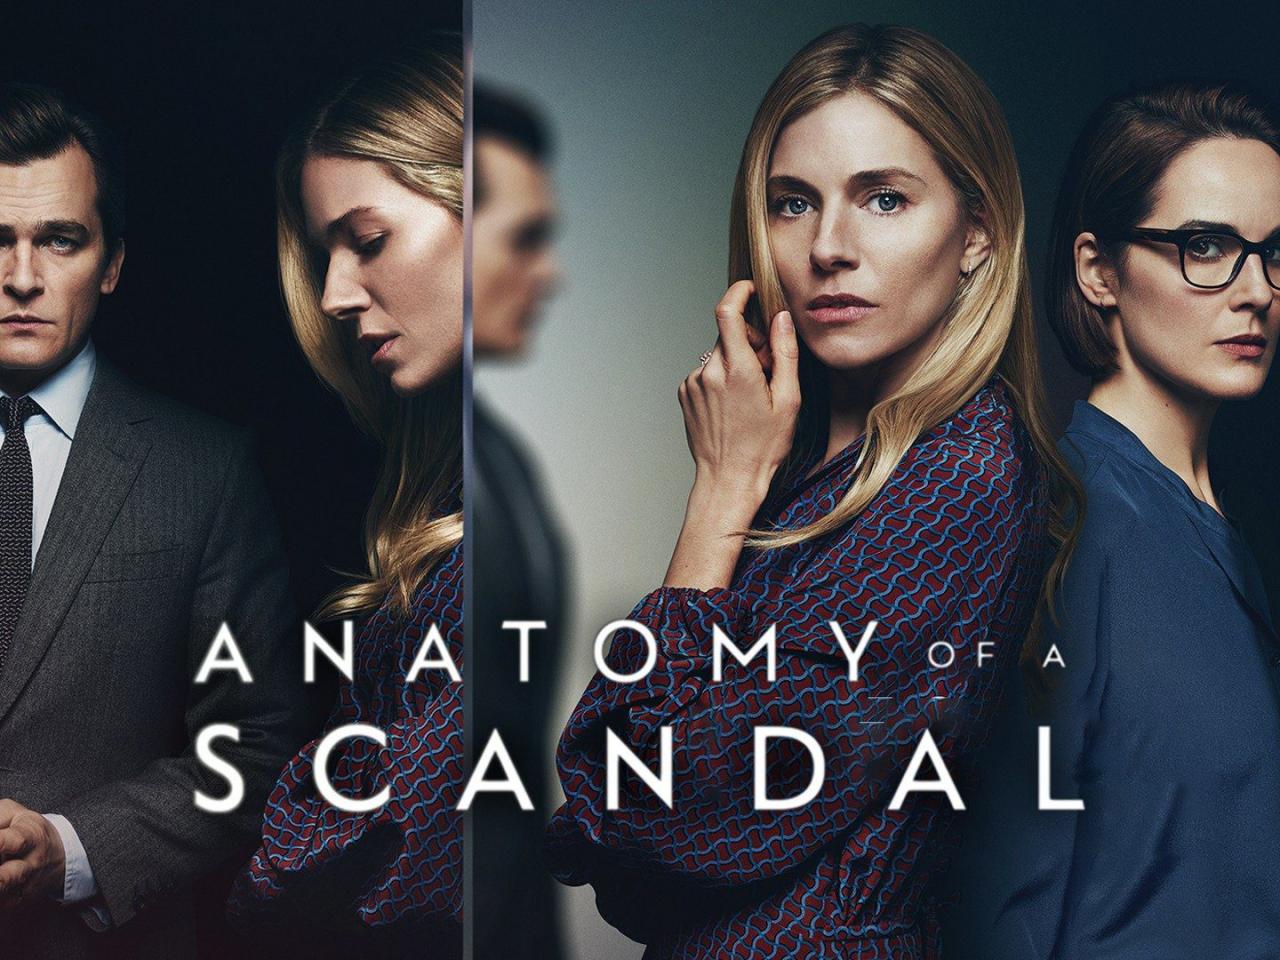 An anatomy of a scandal book